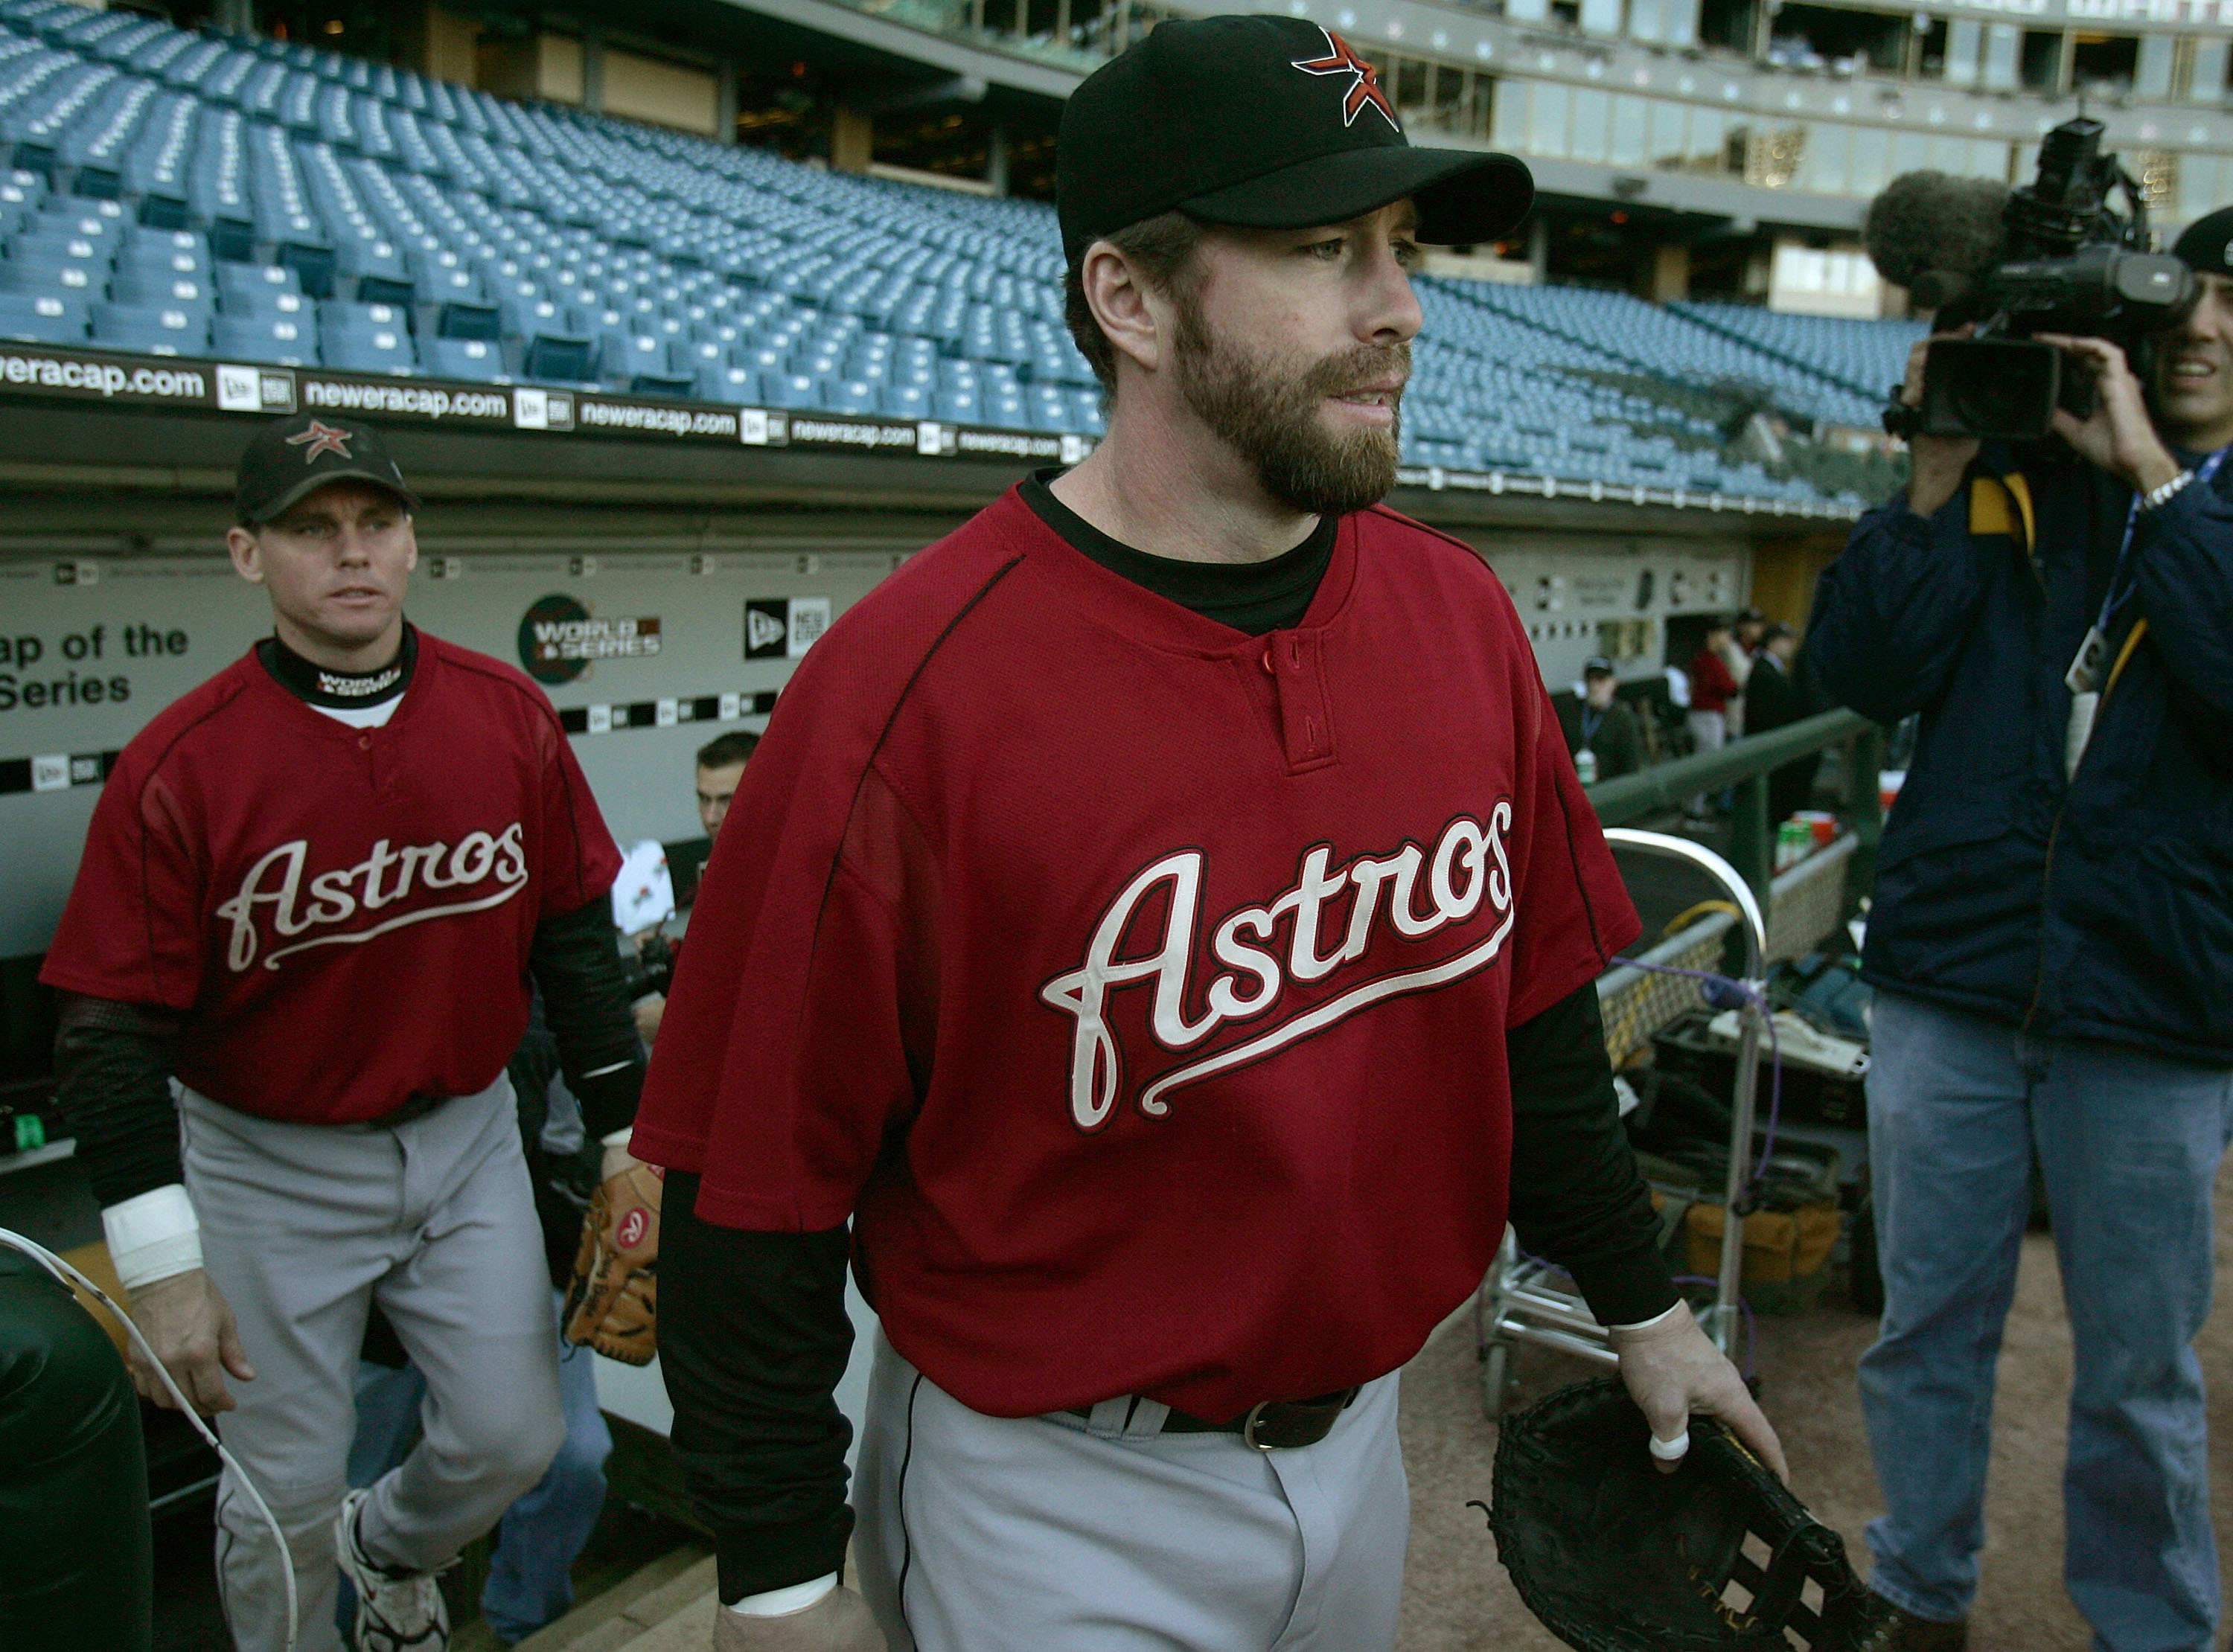 CHICAGO - OCTOBER 21:  Jeff Bagwell #5 (R) and Craig Biggio #7 of the Houston Astros enter the field for a workout on October 21, 2005 at U.S. Cellular Field in Chicago, Illinois. The Astros begin play in the World Series Saturday night against the Chicag